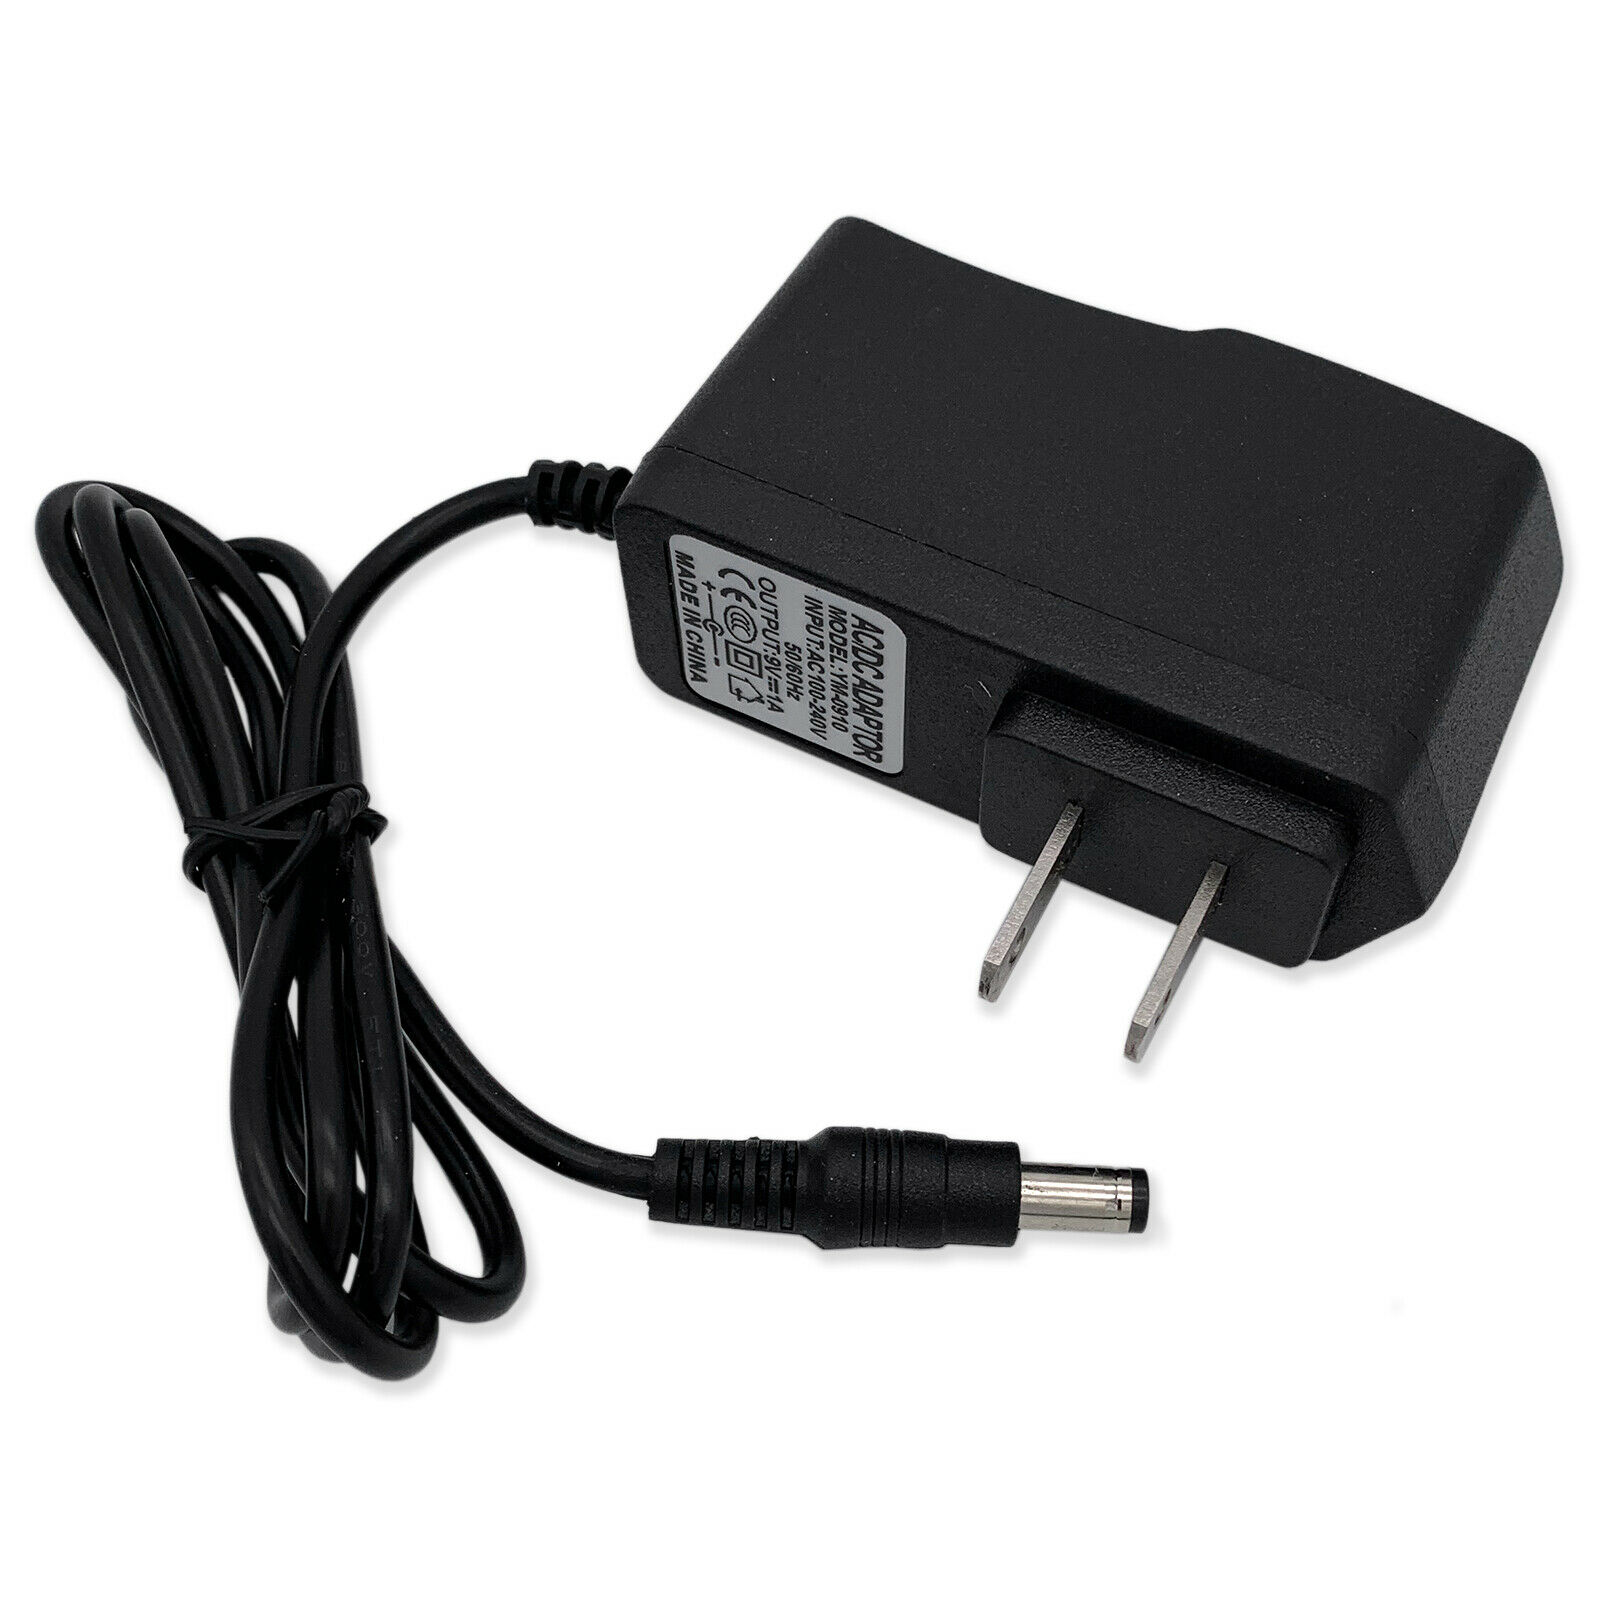 9V AC/DC Adapter Charger For Brother AD-24 AD-24ES LABEL PRINTER Power Supply Brand: Unbranded/Generic Color: Black - Click Image to Close